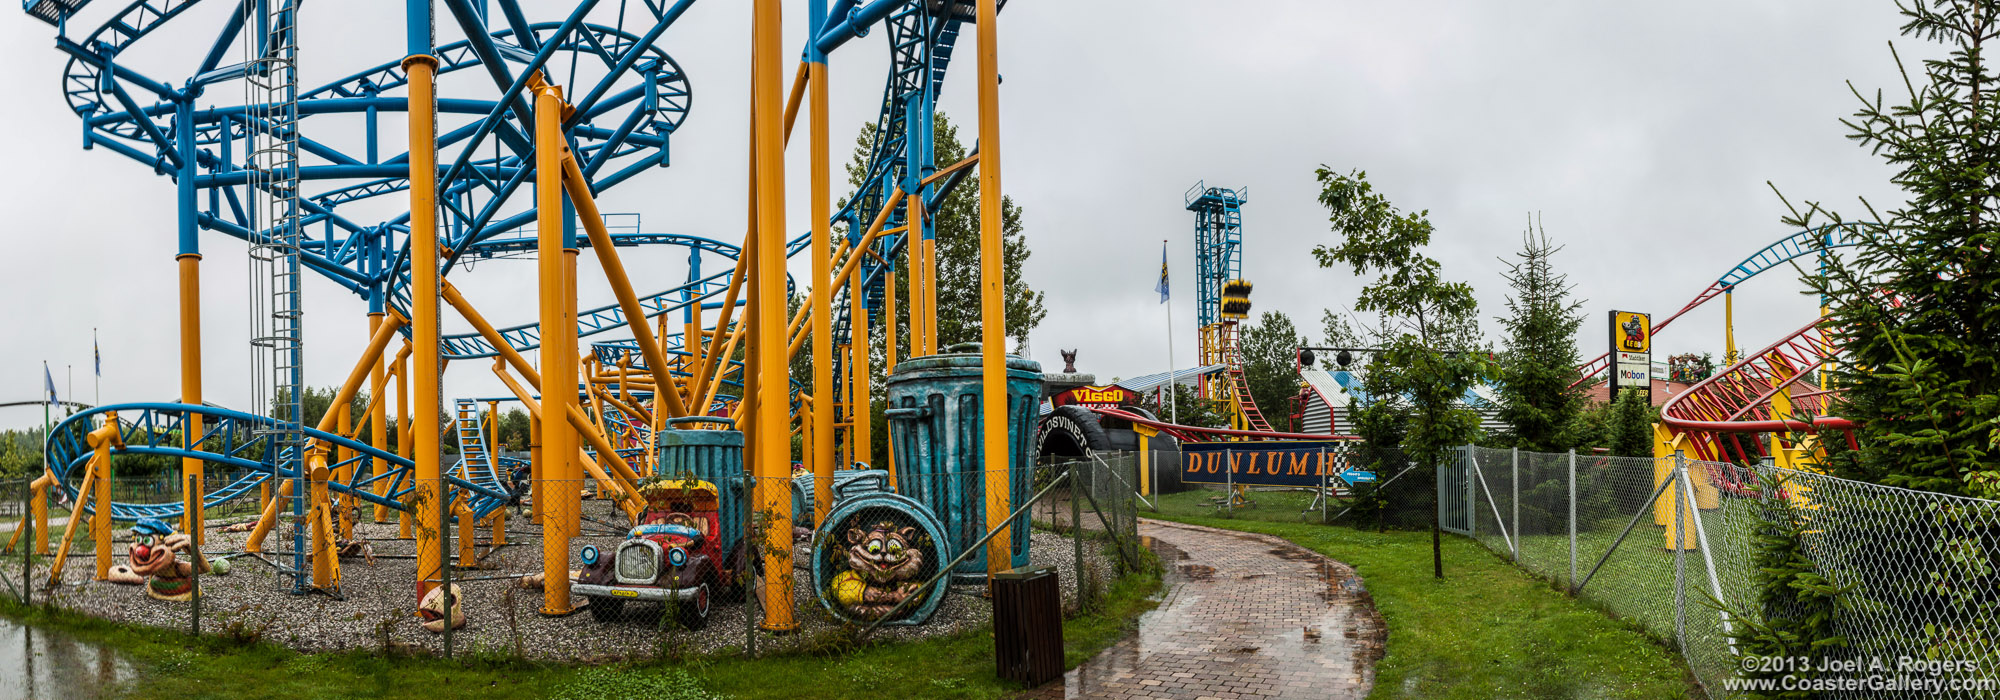 Pictures of the strange roller coasters and statues of BonBon-Land in Denmark